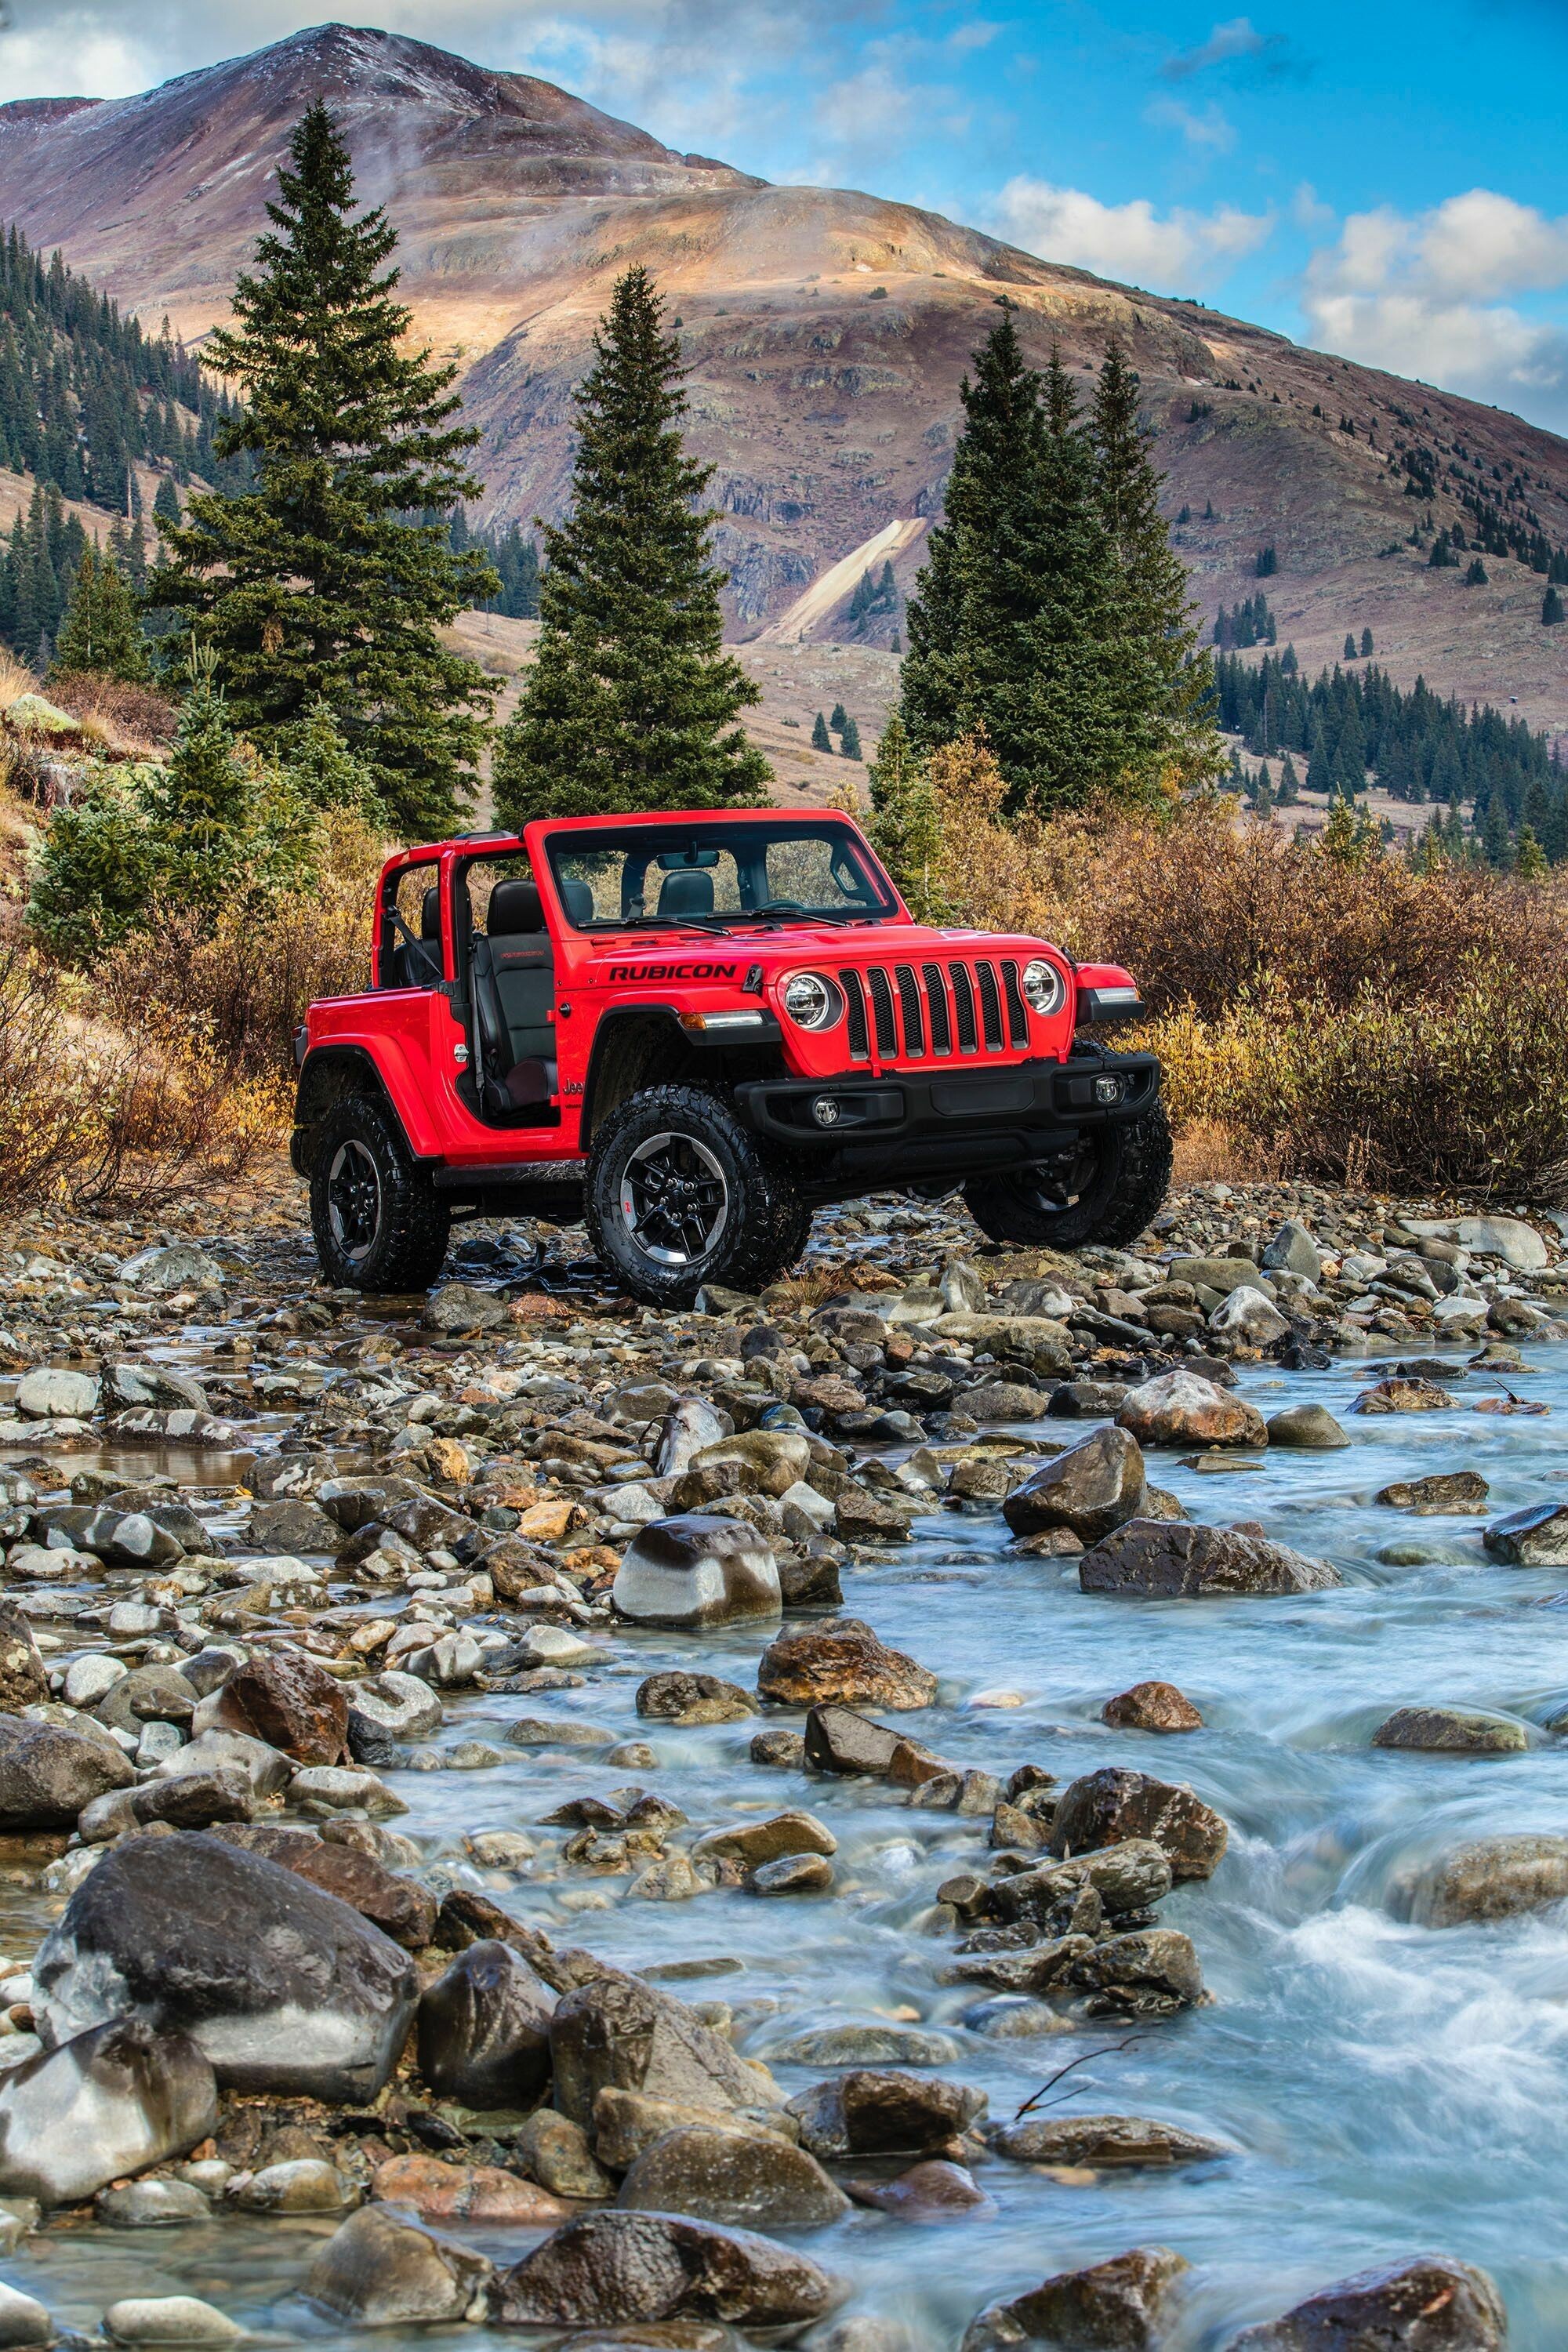 Jeep Wrangler: Rubicon, 2004-2006 models were longer versions with 2 doors. 2000x3000 HD Background.